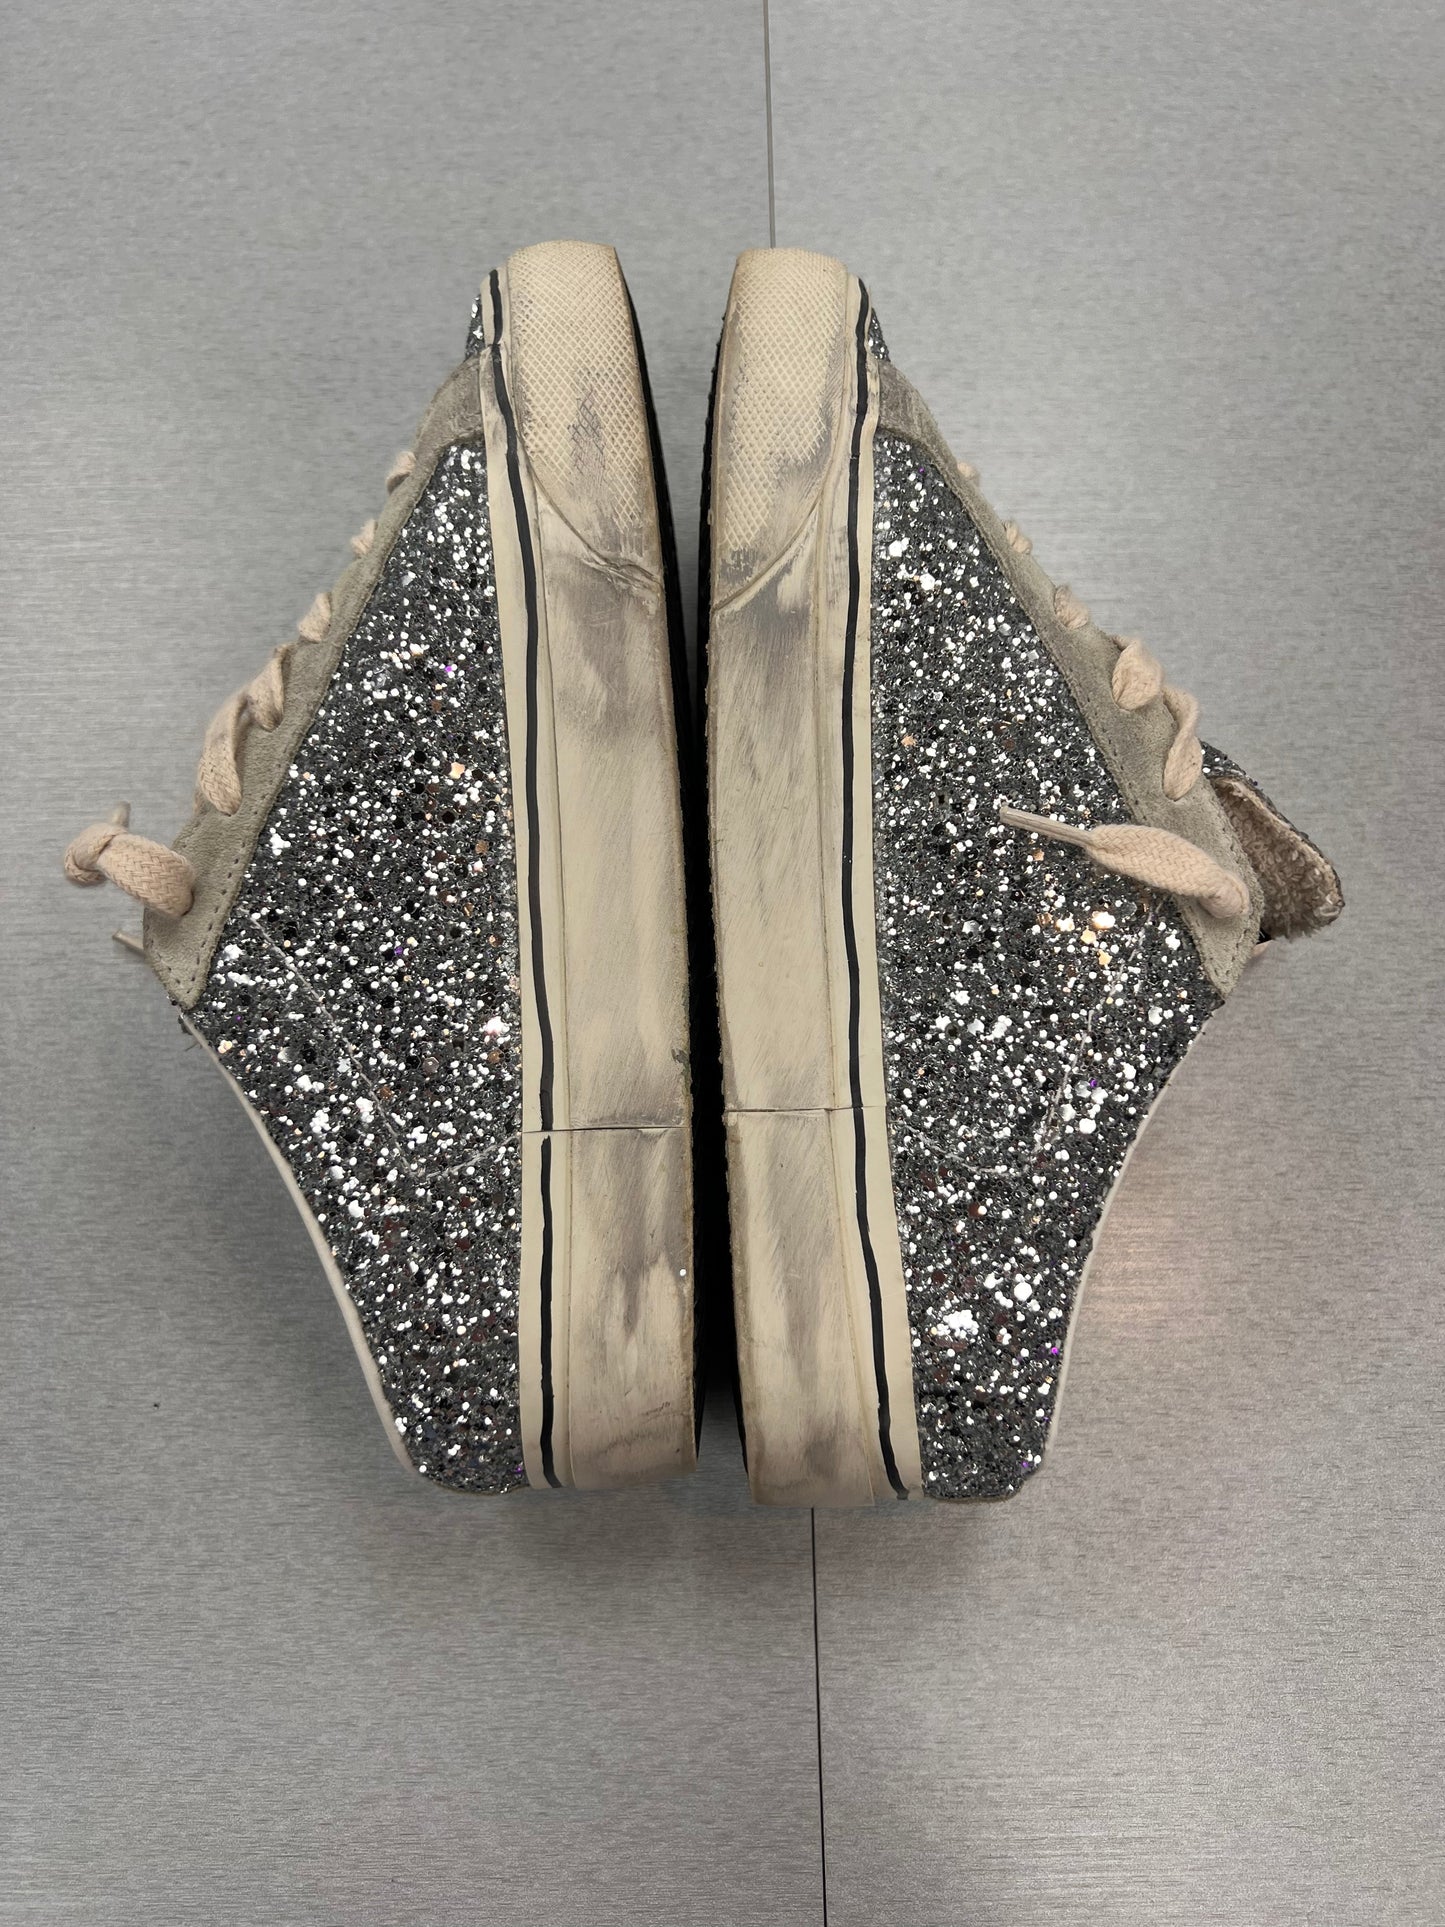 Shoes Sneakers By Golden Goose Size: 6